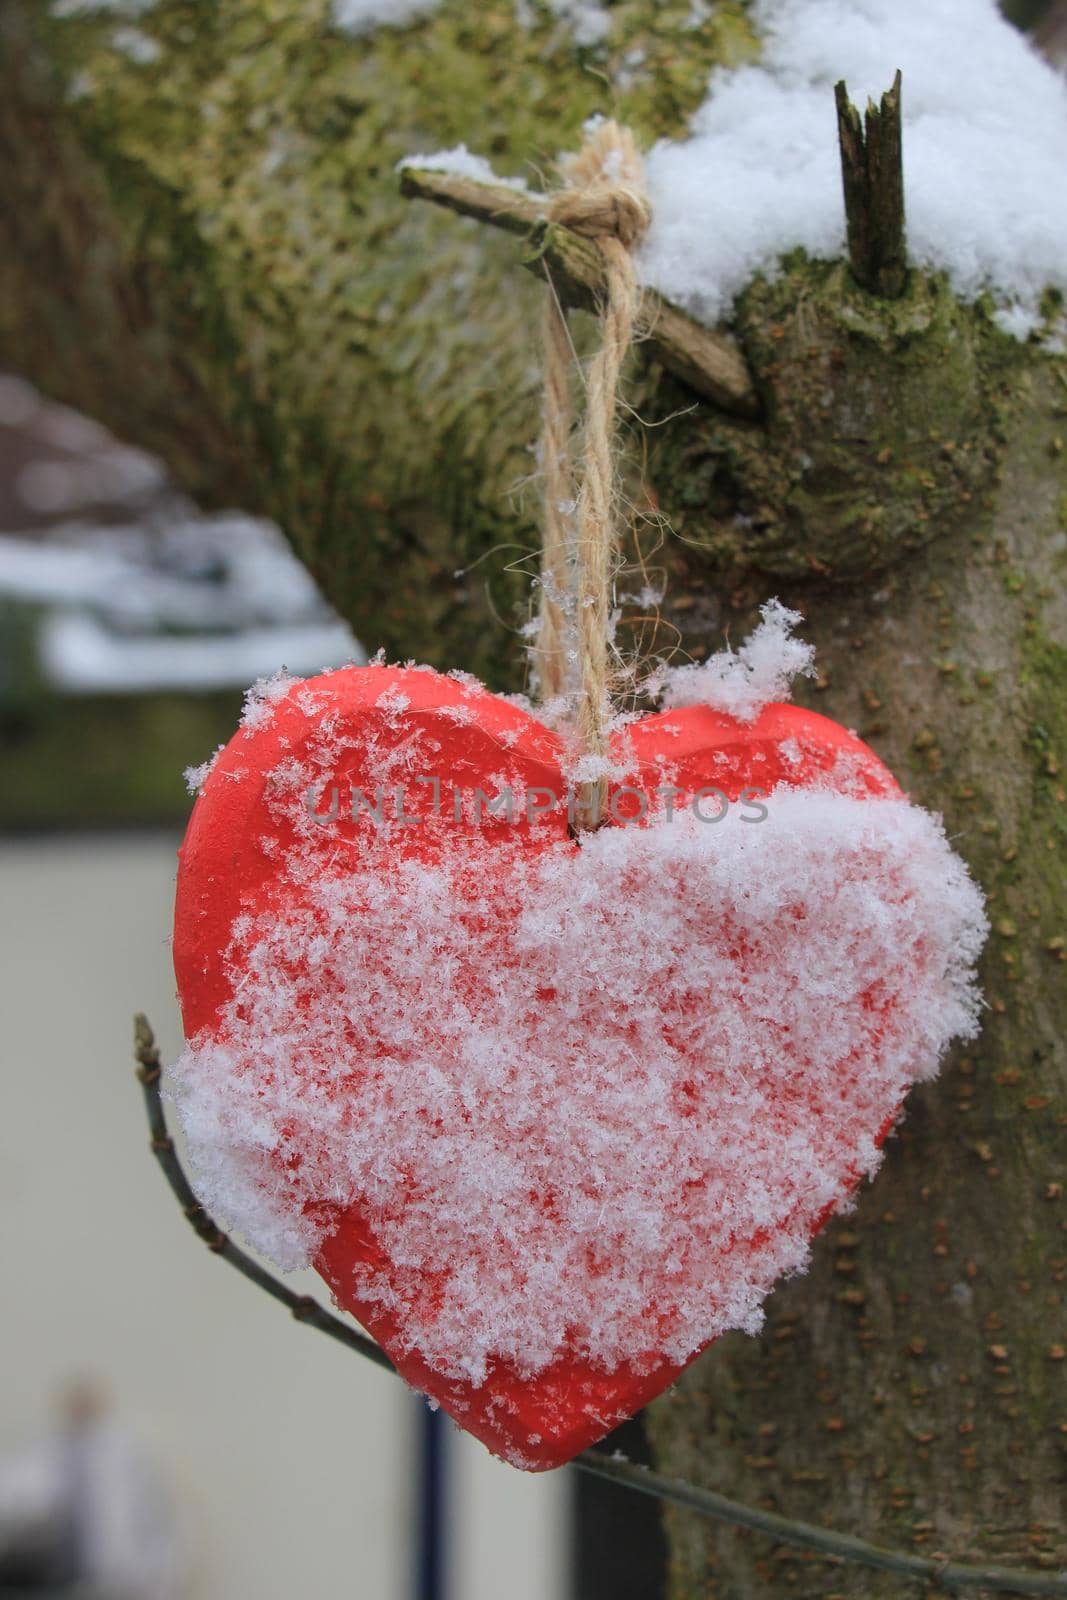 Red wooden heart shaped ornaments with fresh fallen snow